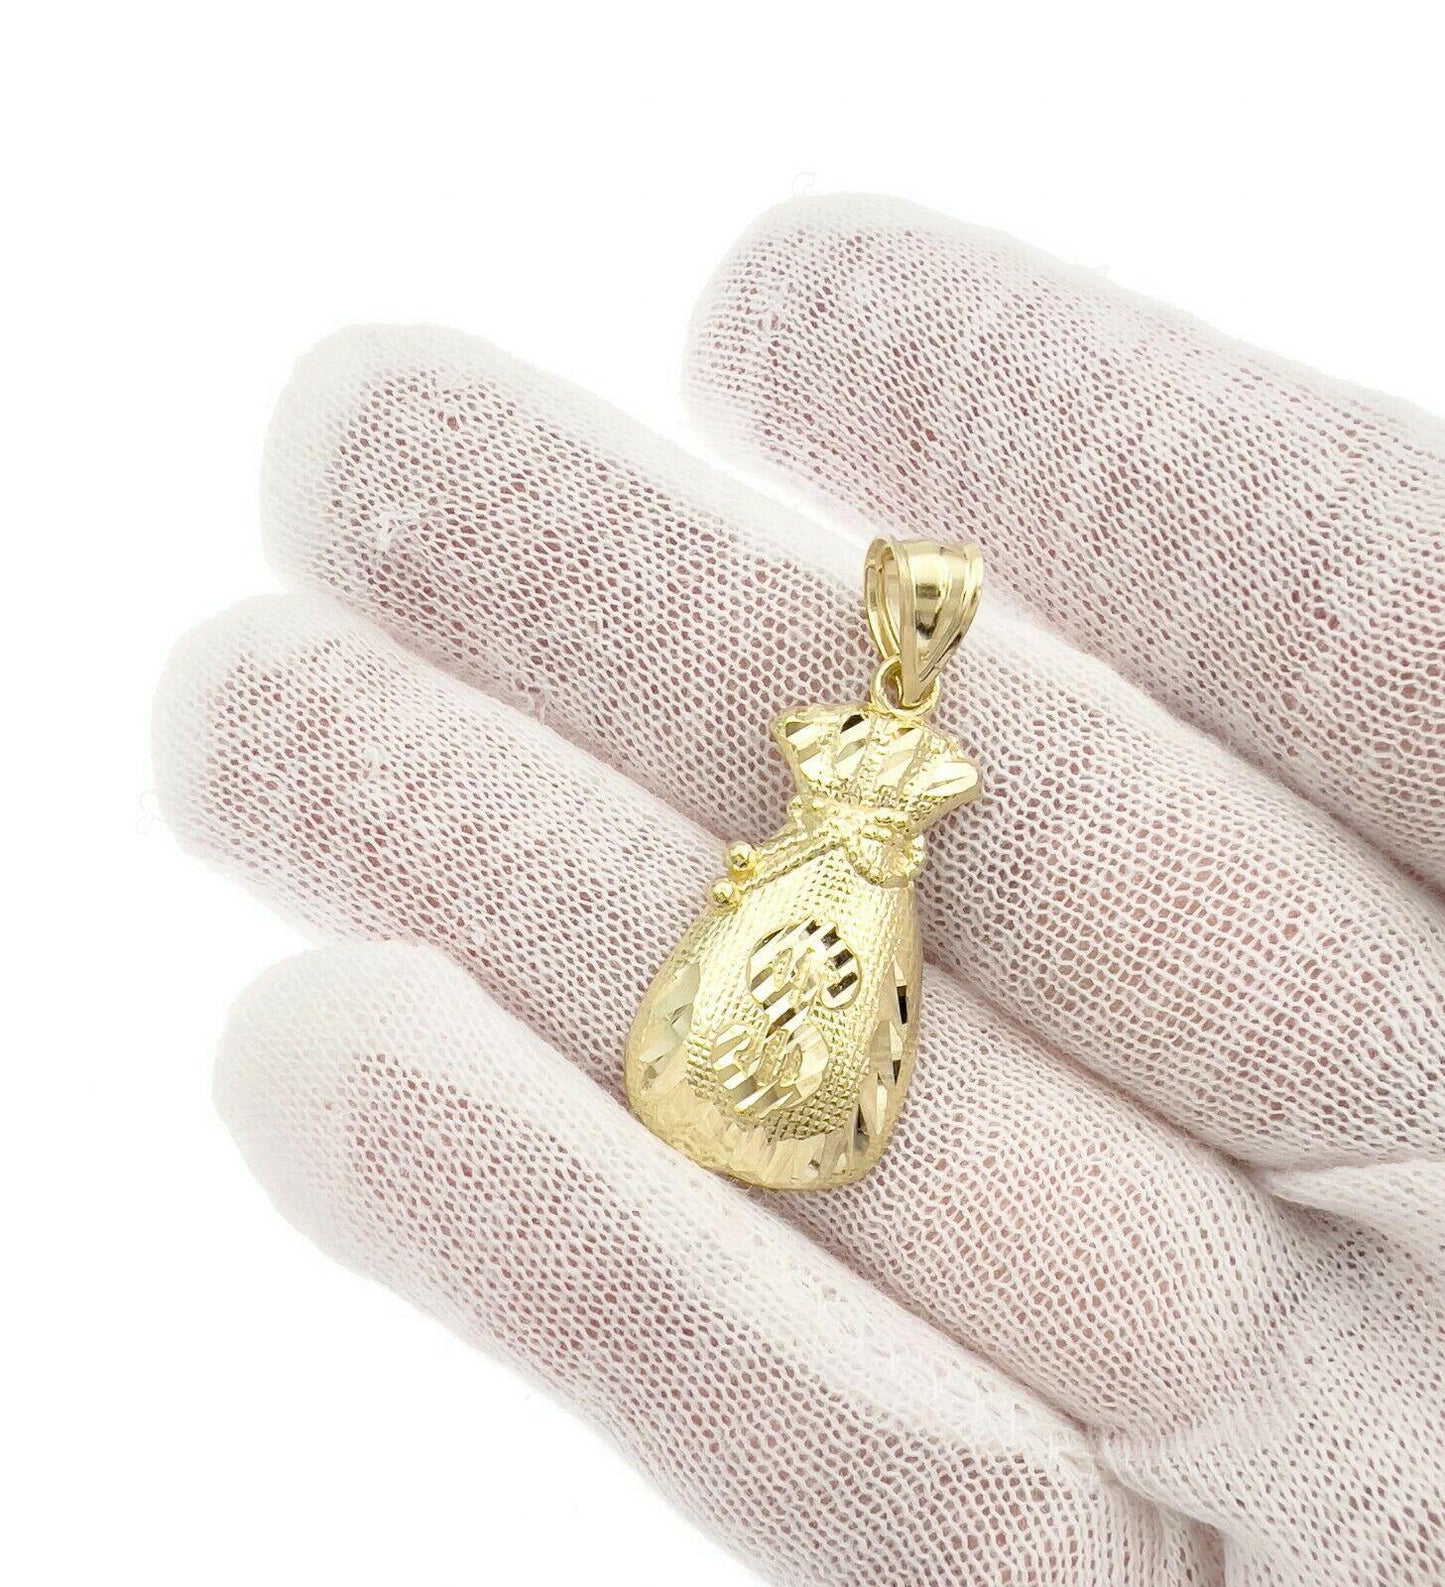 Etched Money Bag Necklace Charm in 10K Gold